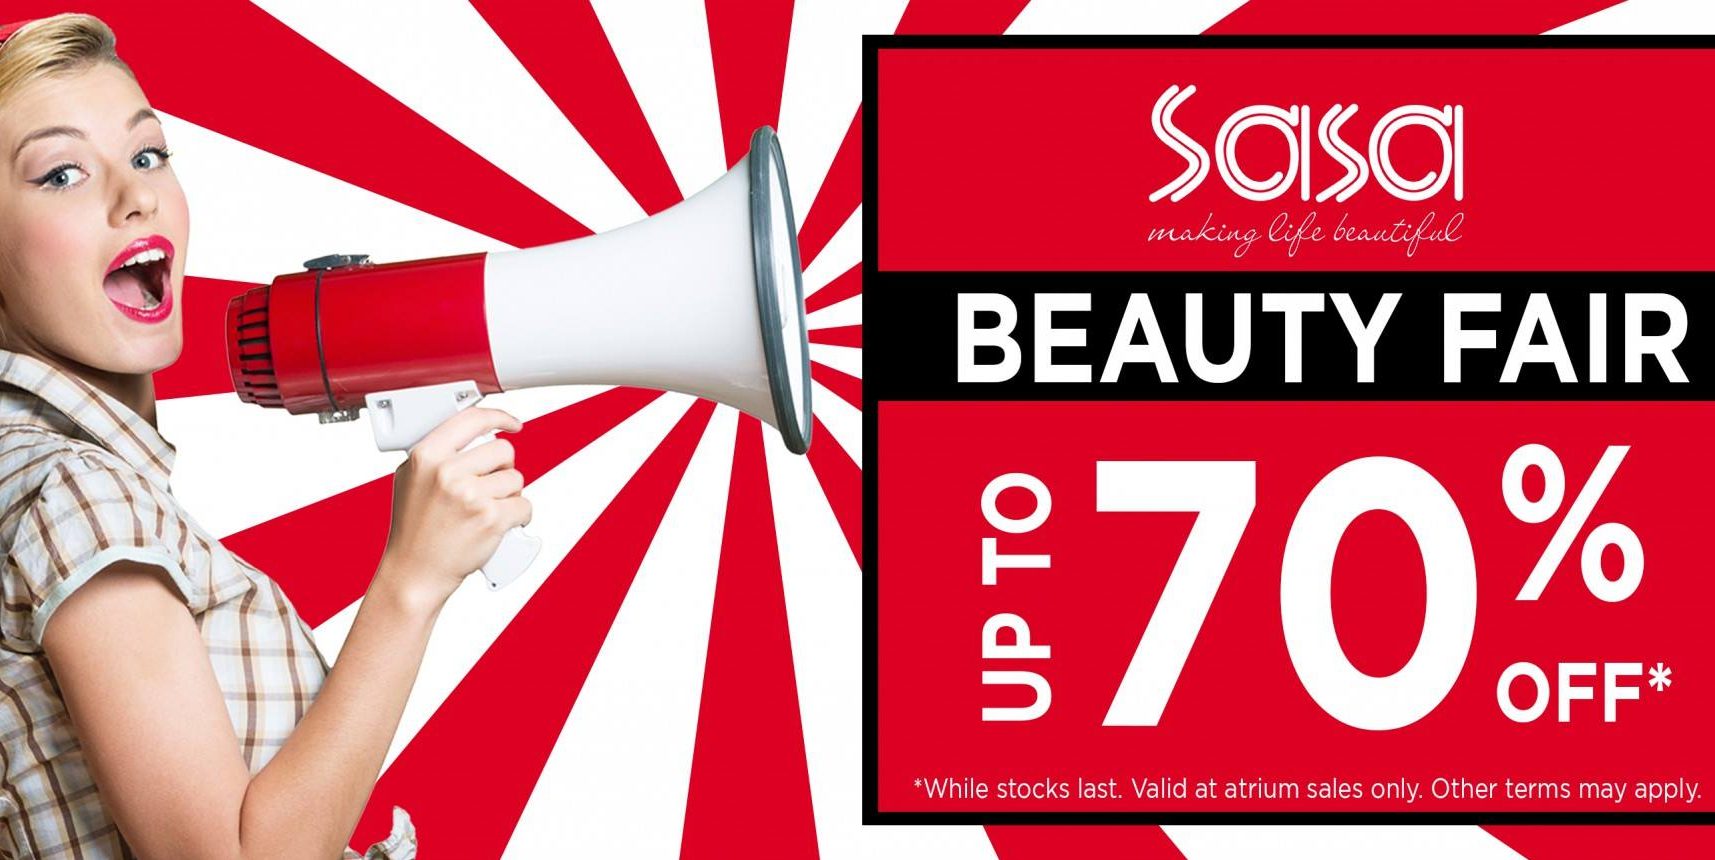 Sasa Singapore Beauty Fair at Chinatown Point Up to 70% Off Promotion 10-16 Apr 2017